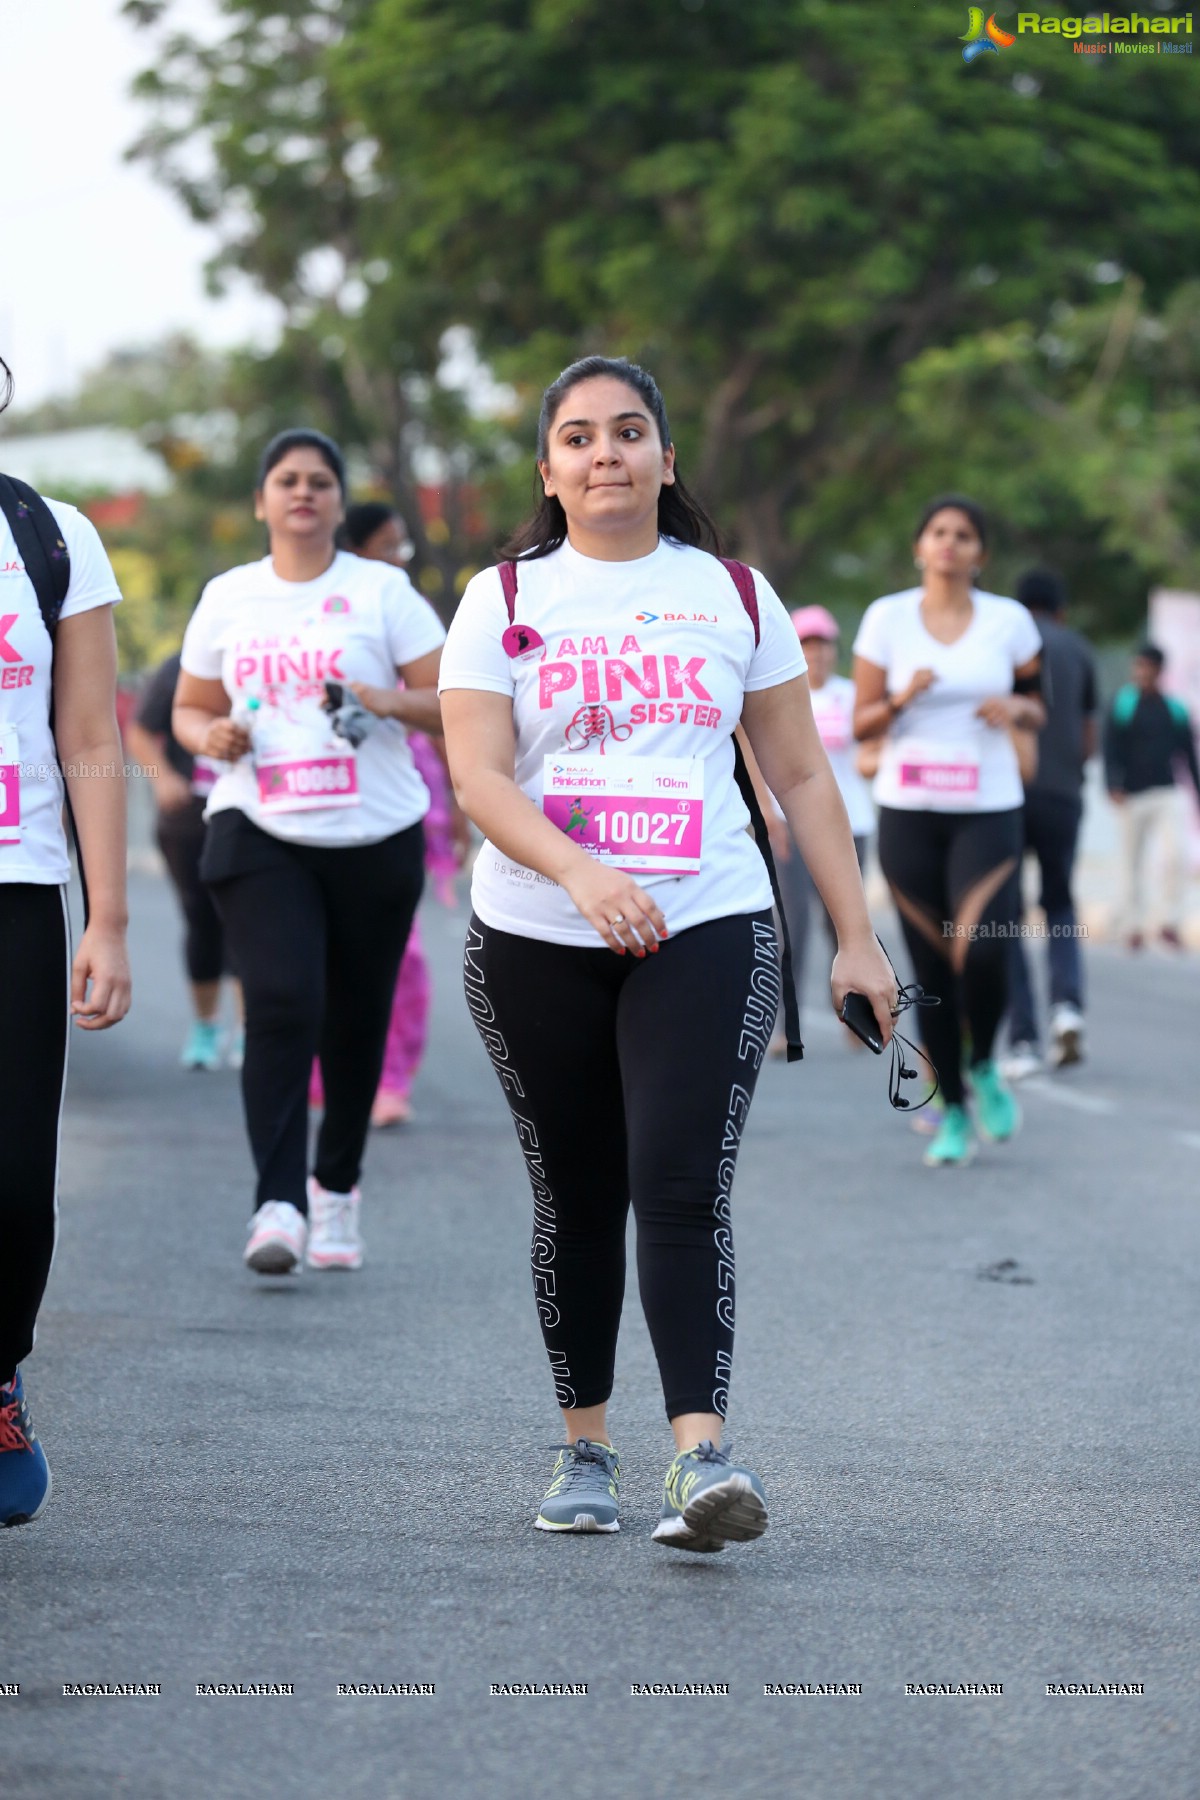 Bajaj Electricals Pinkathon Hyderabad Presented by Colors at People's Plaza, Necklace Road